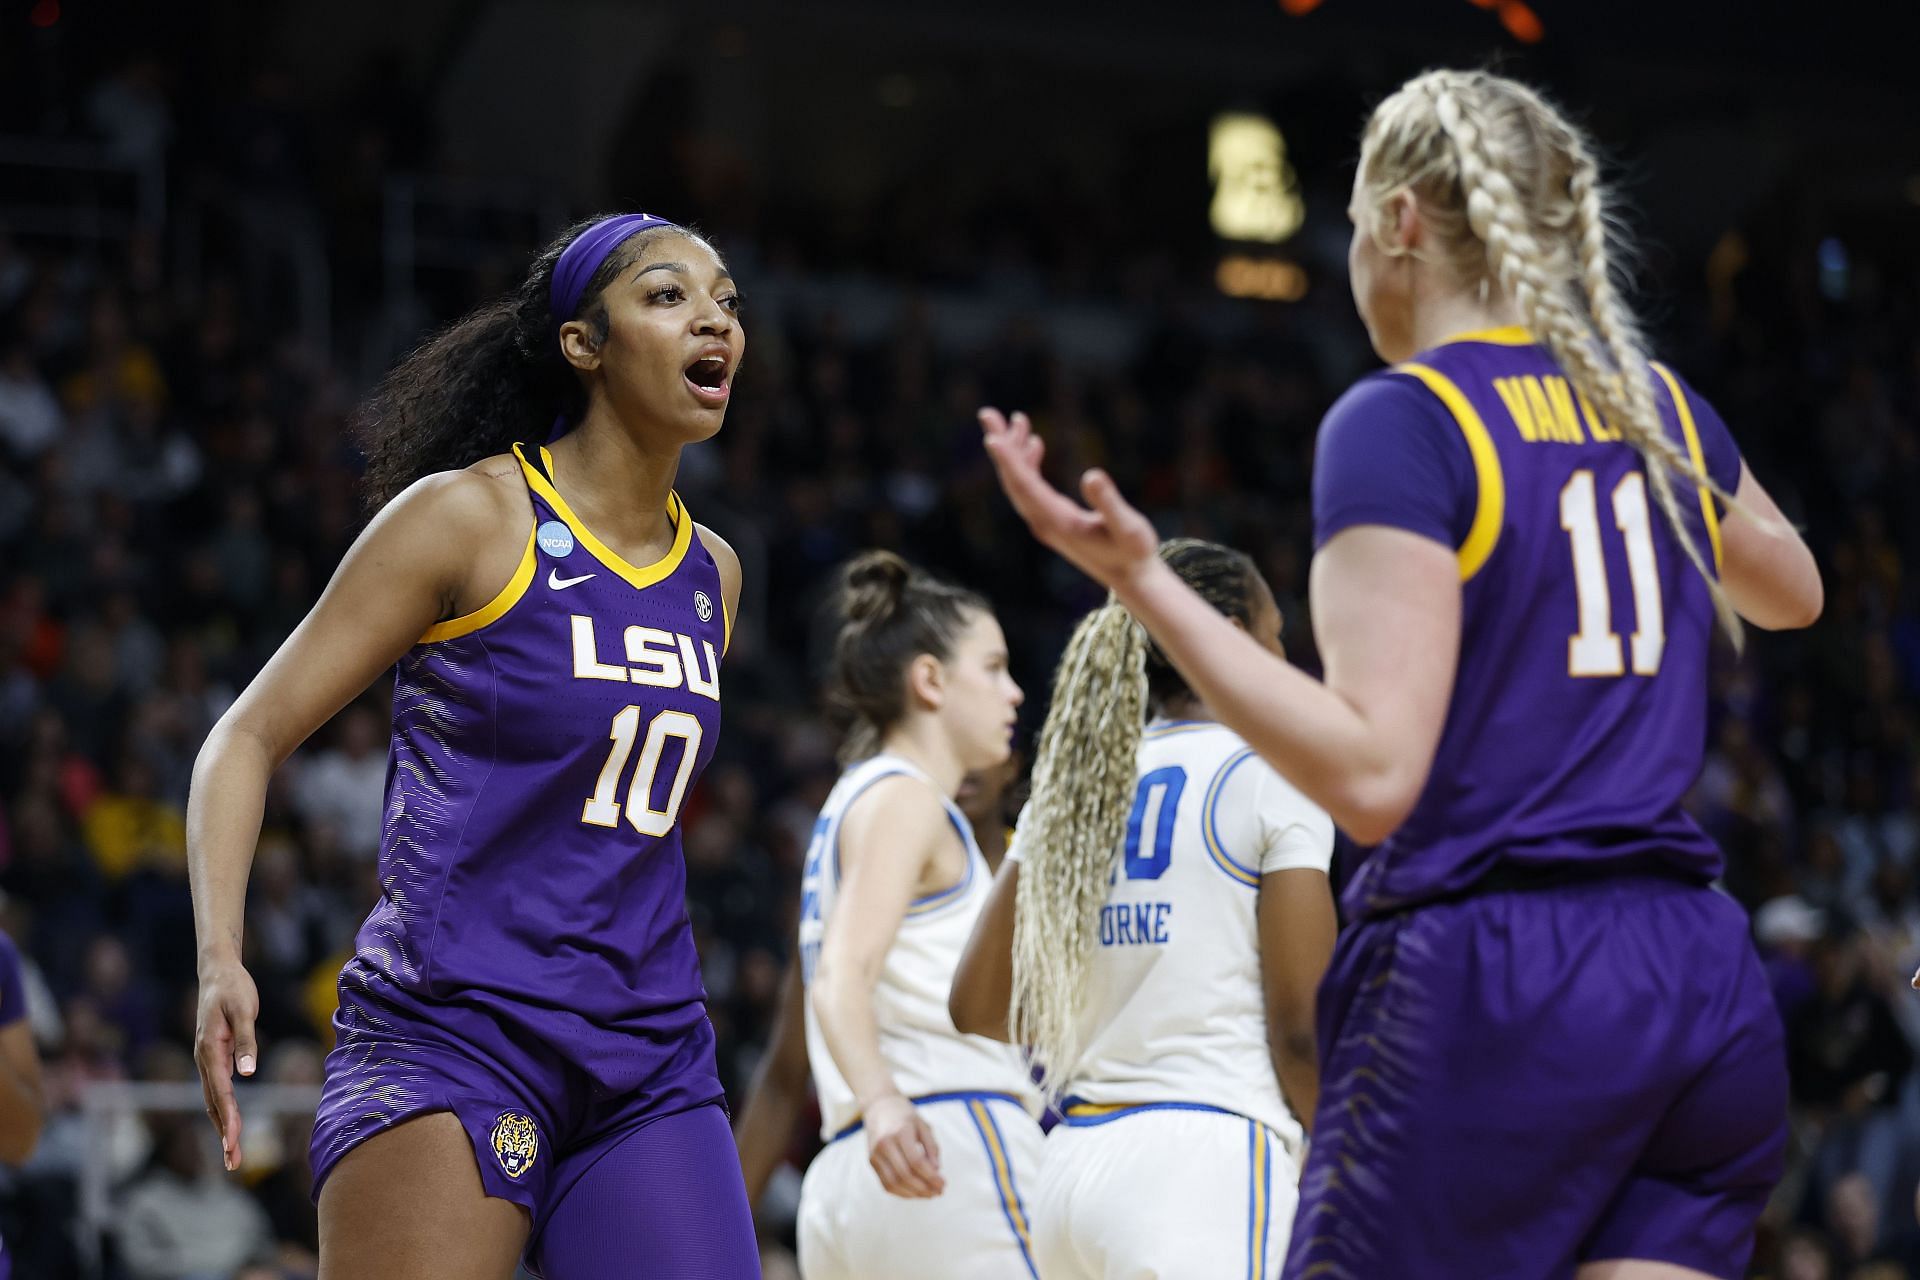 Reese tallied a 16-point, 11-rebound double-double for LSU.